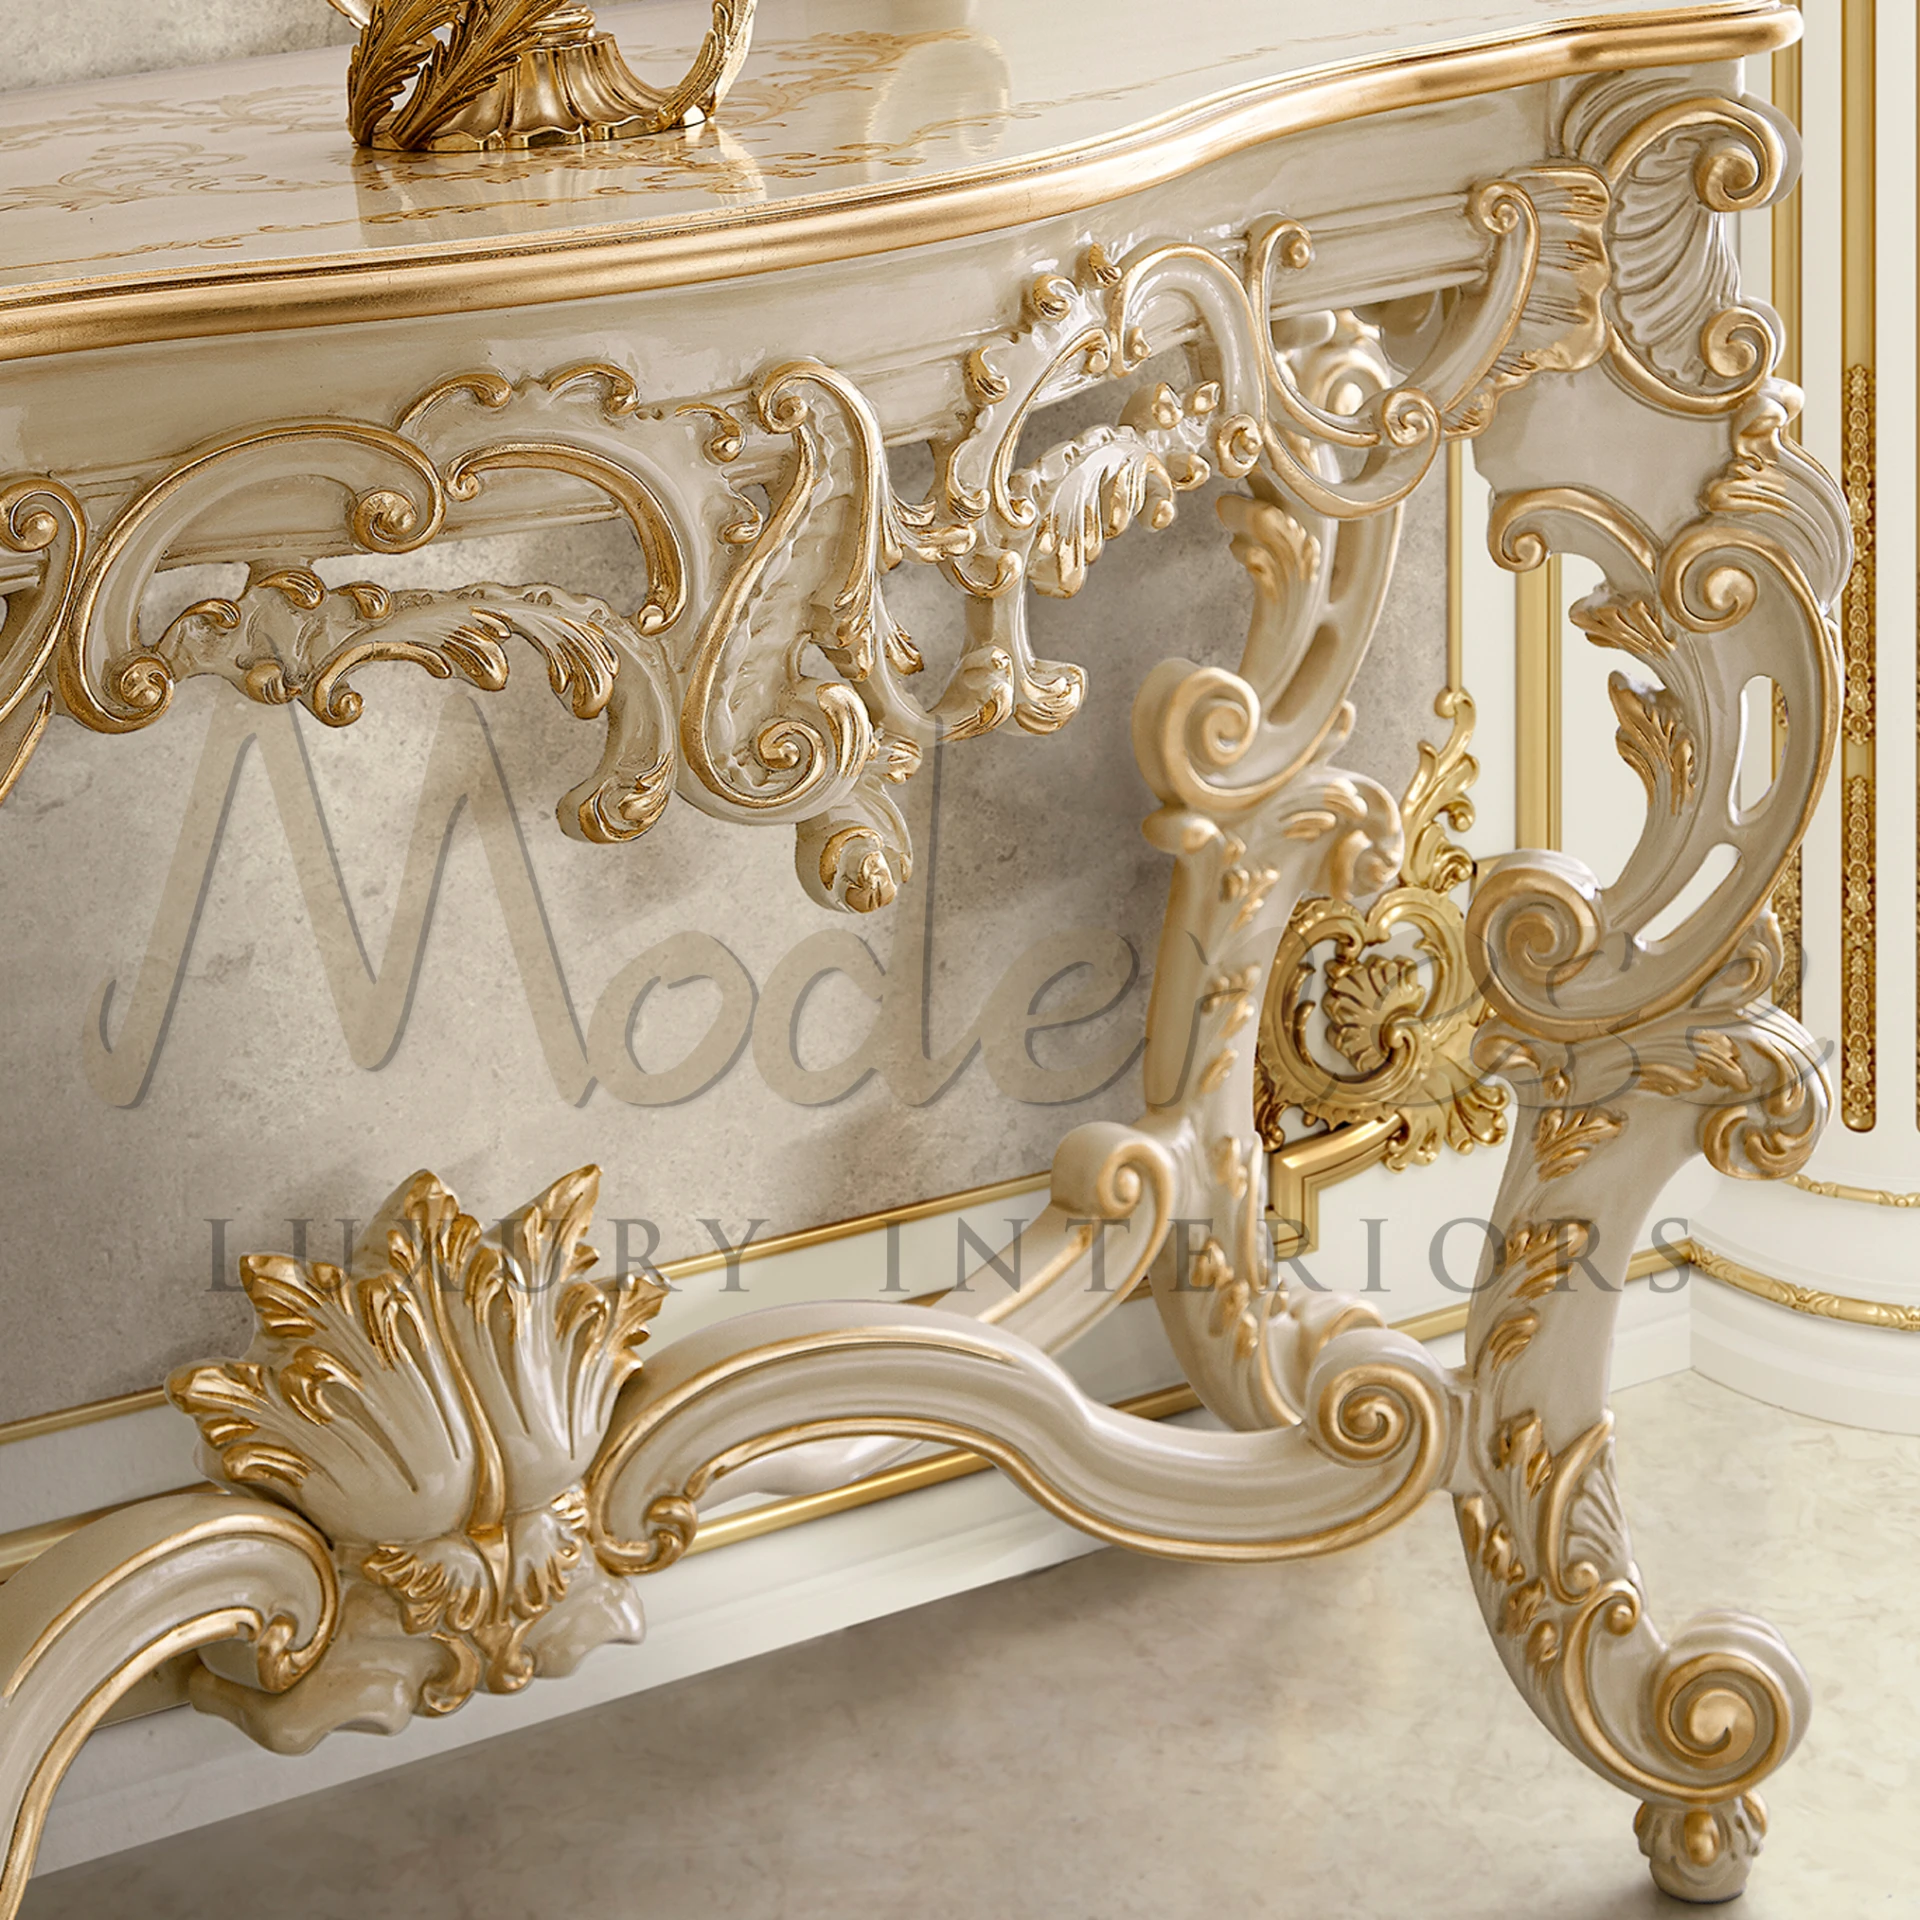 Opulent Baroque Console with intricate hand-carved details, adding elegance to any room with Italian design.